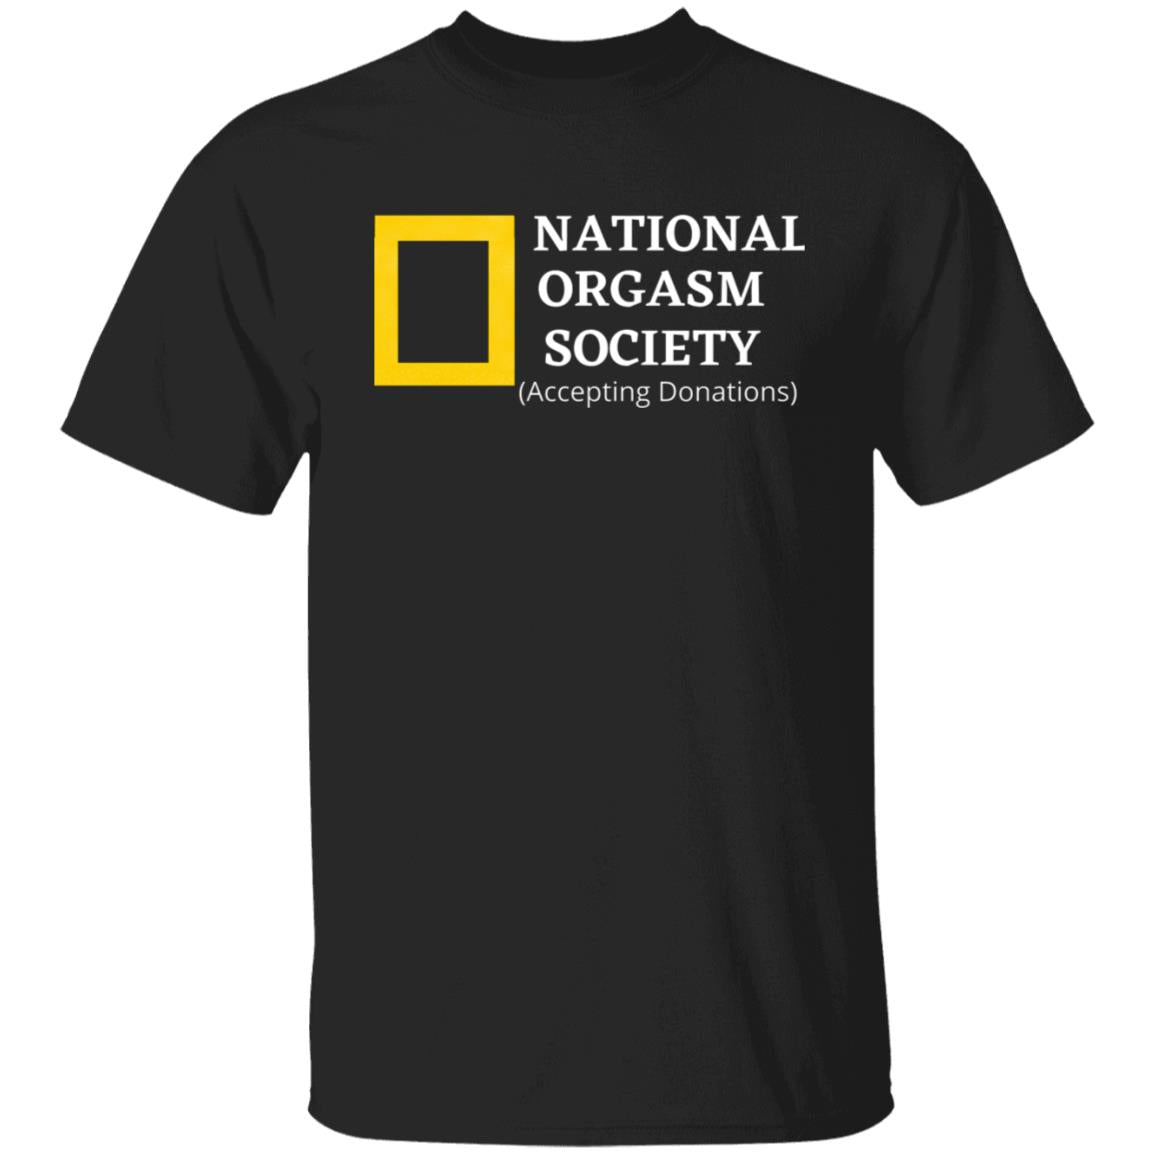 Adult Humor National Orgasm Society National Geographic Spoof T-Shirt Sarcastic Science Graphic Tee